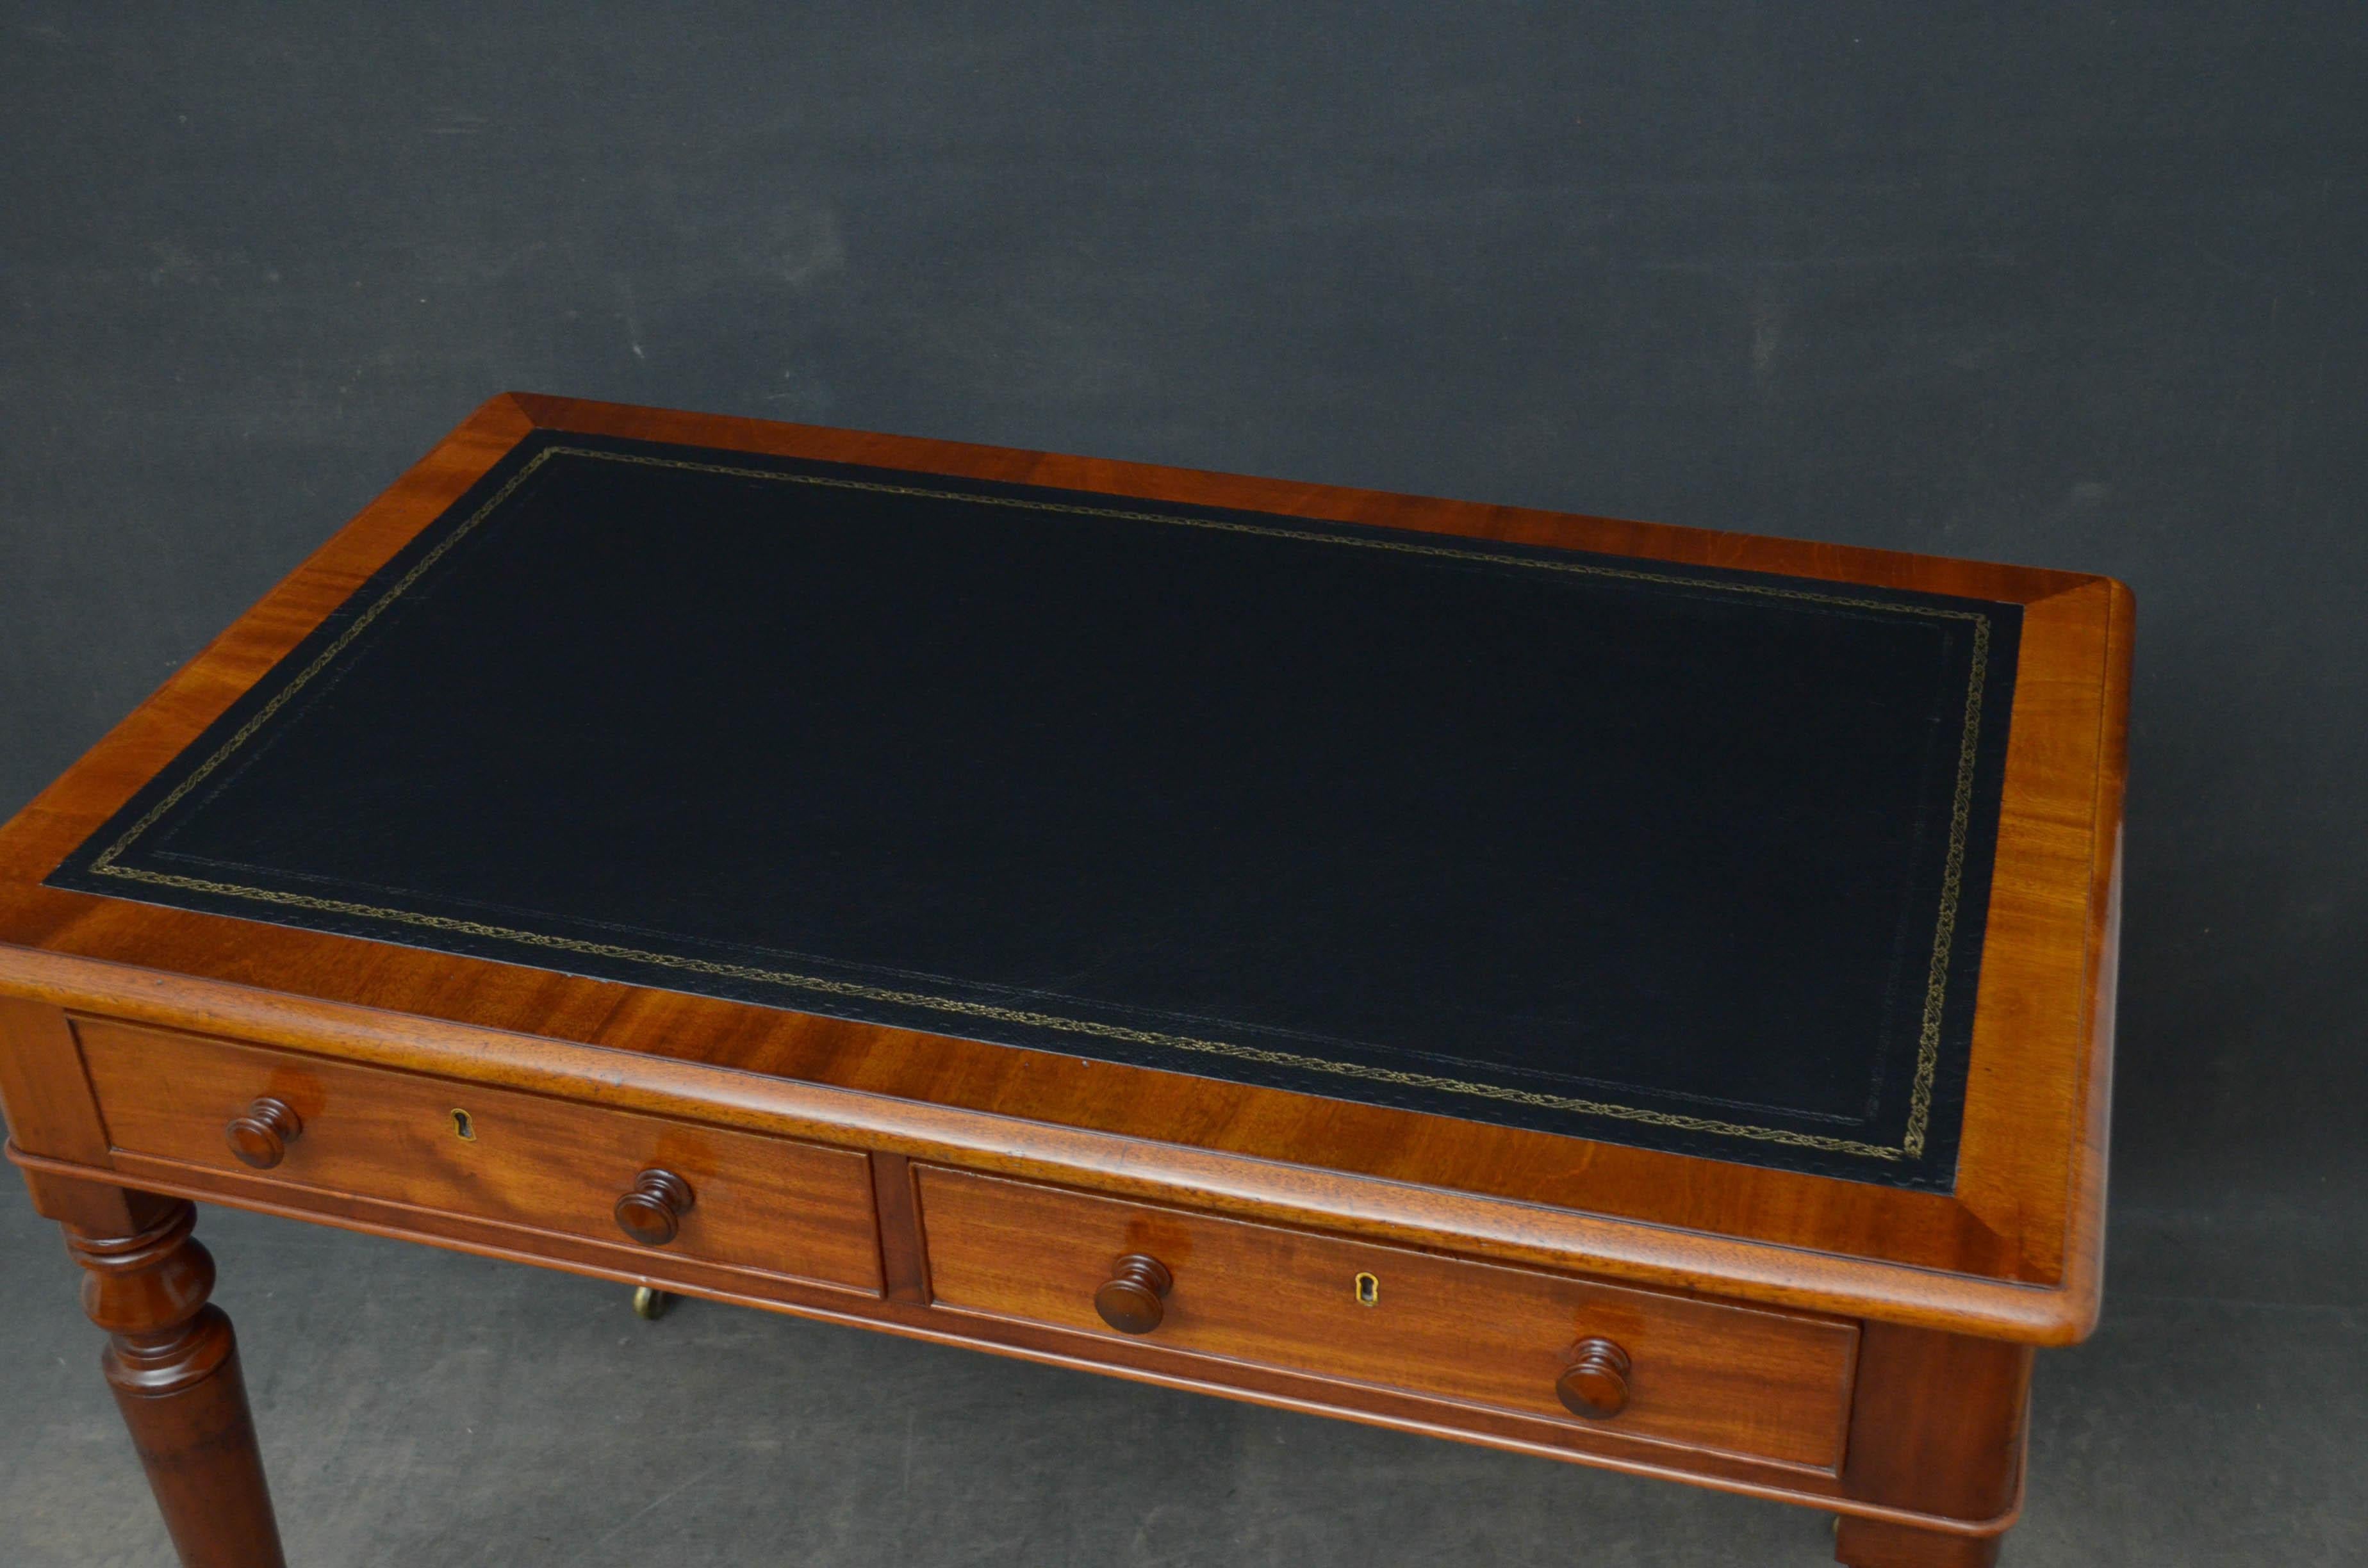 Sn5129 Fine quality early Victorian writing desk in mahogany, having black tooled leather top and two cockbeaded and mahogany lined drawers fitted with original turned knobs, standing on turned, carved and ring tapering legs terminating in original